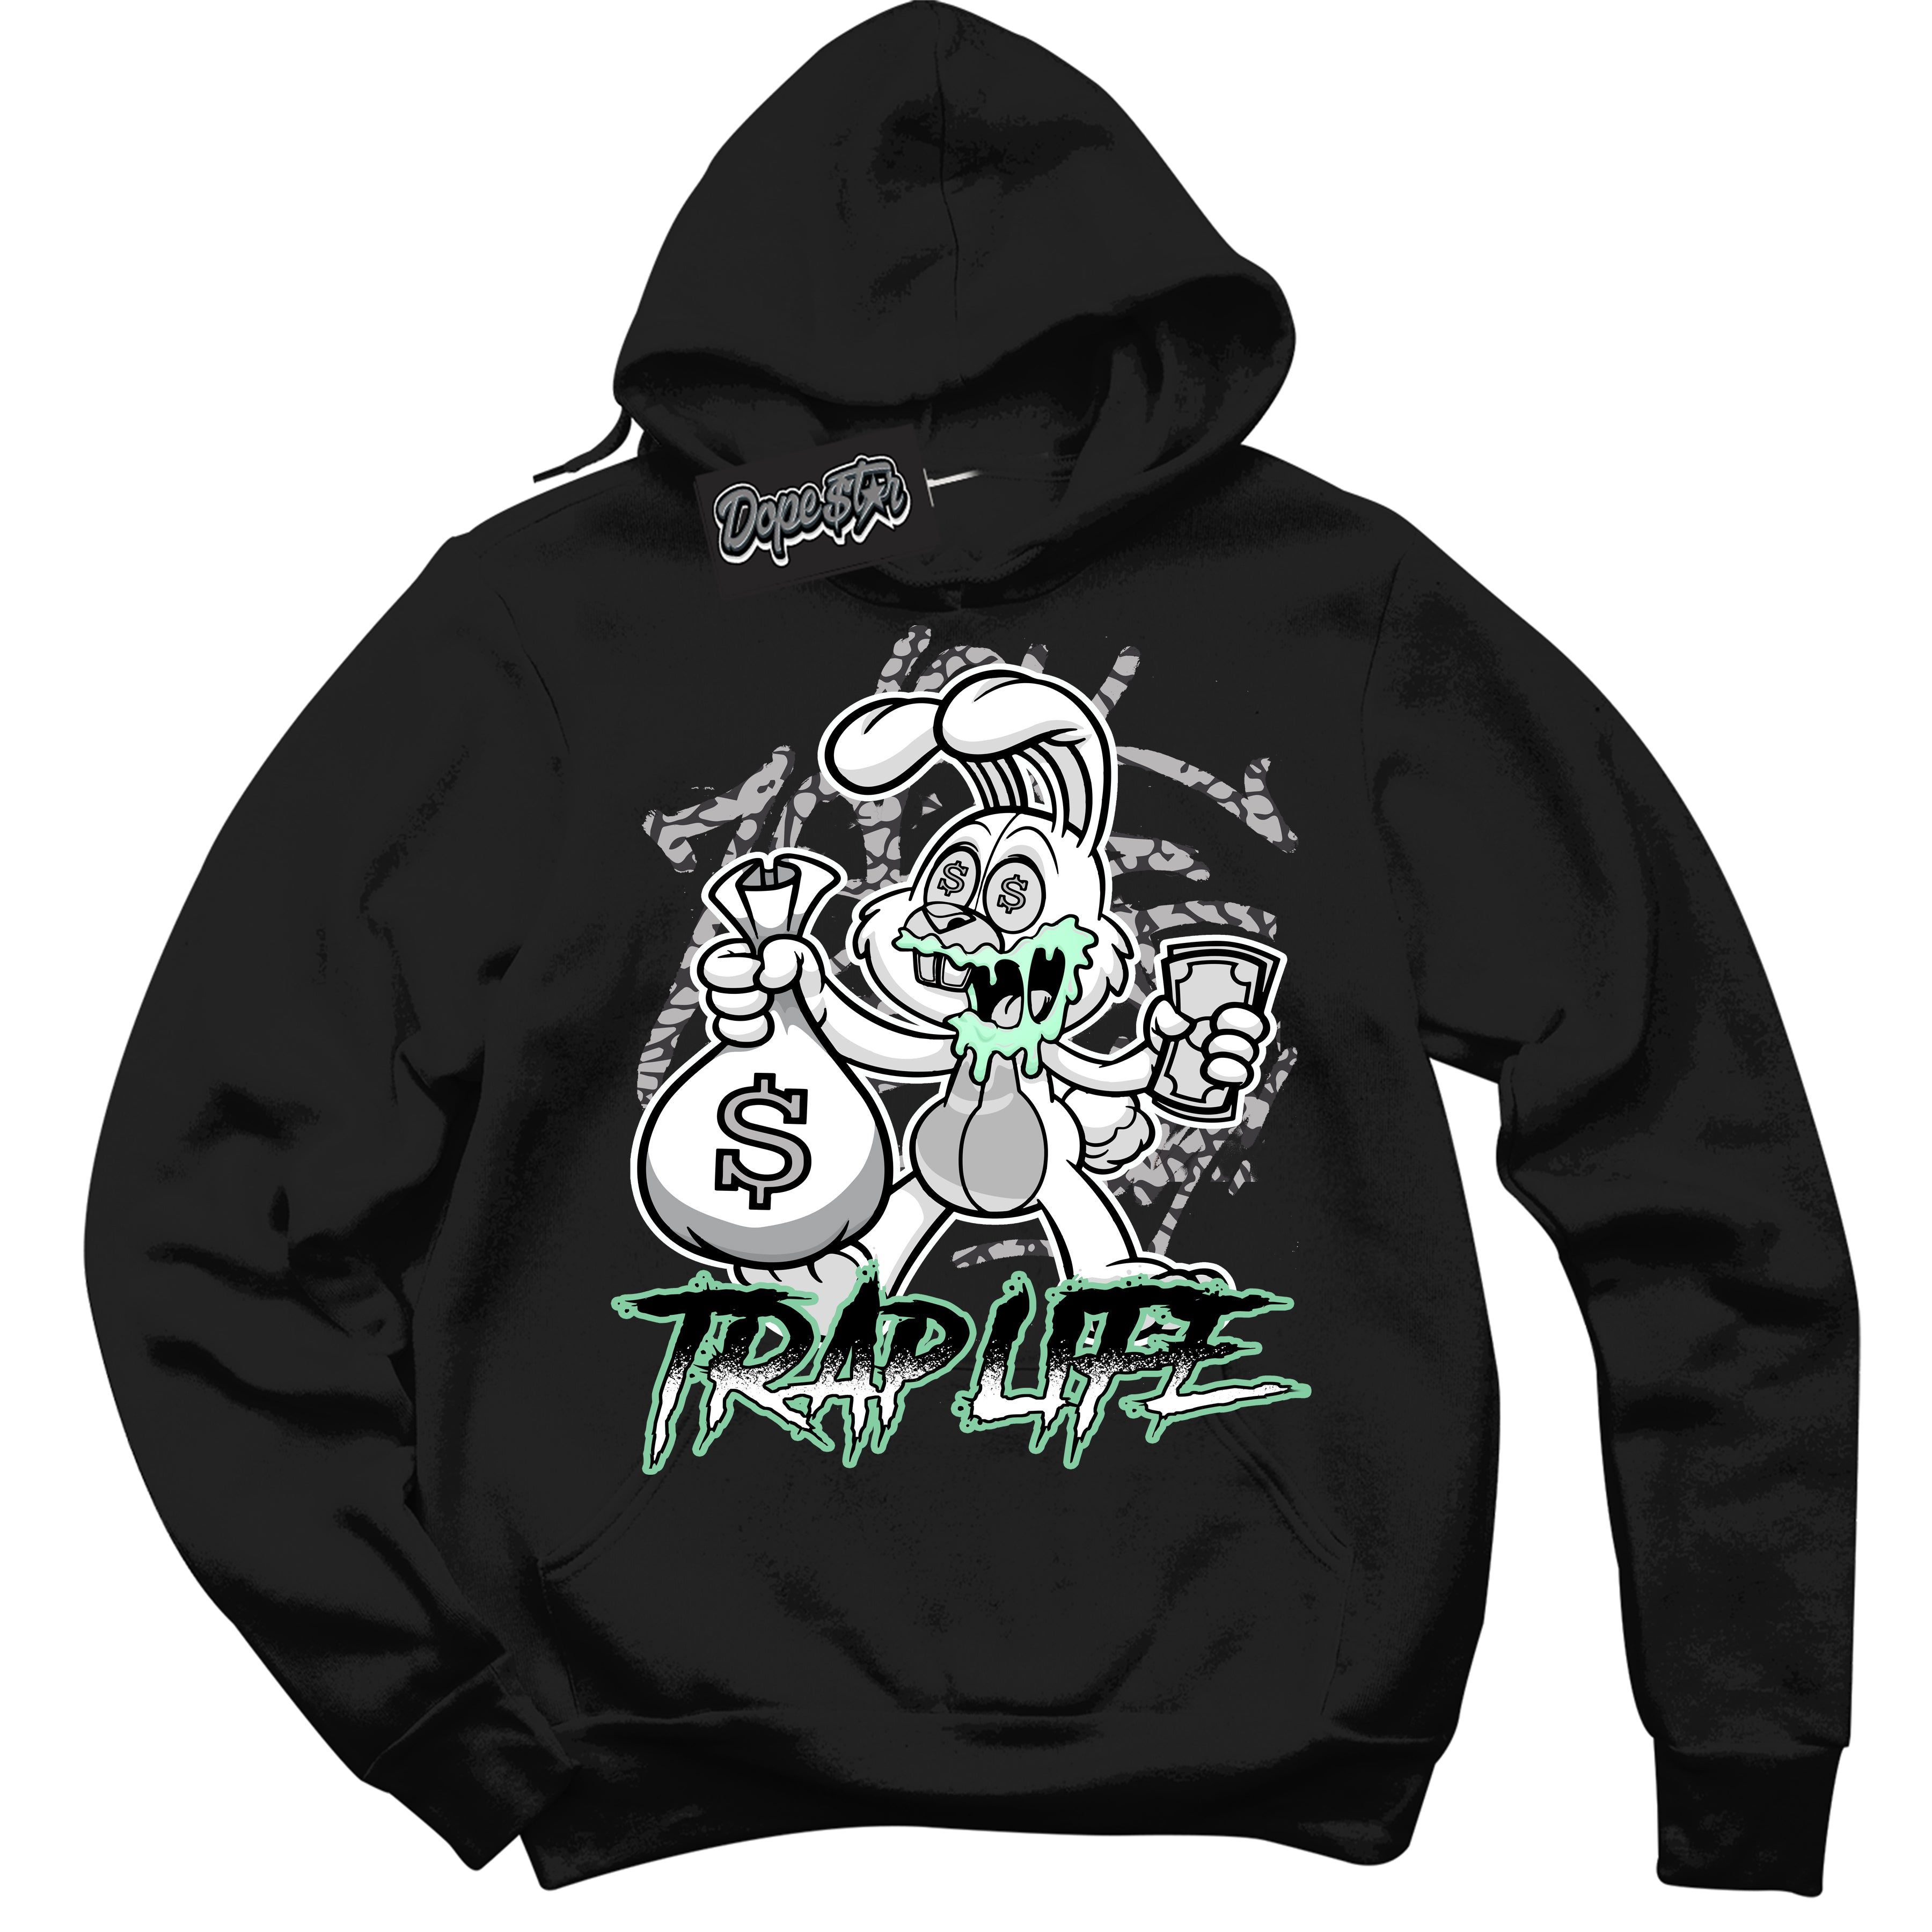 Cool Black Graphic DopeStar Hoodie with “ Trap Rabbit “ print, that perfectly matches Green Glow 3S sneakers